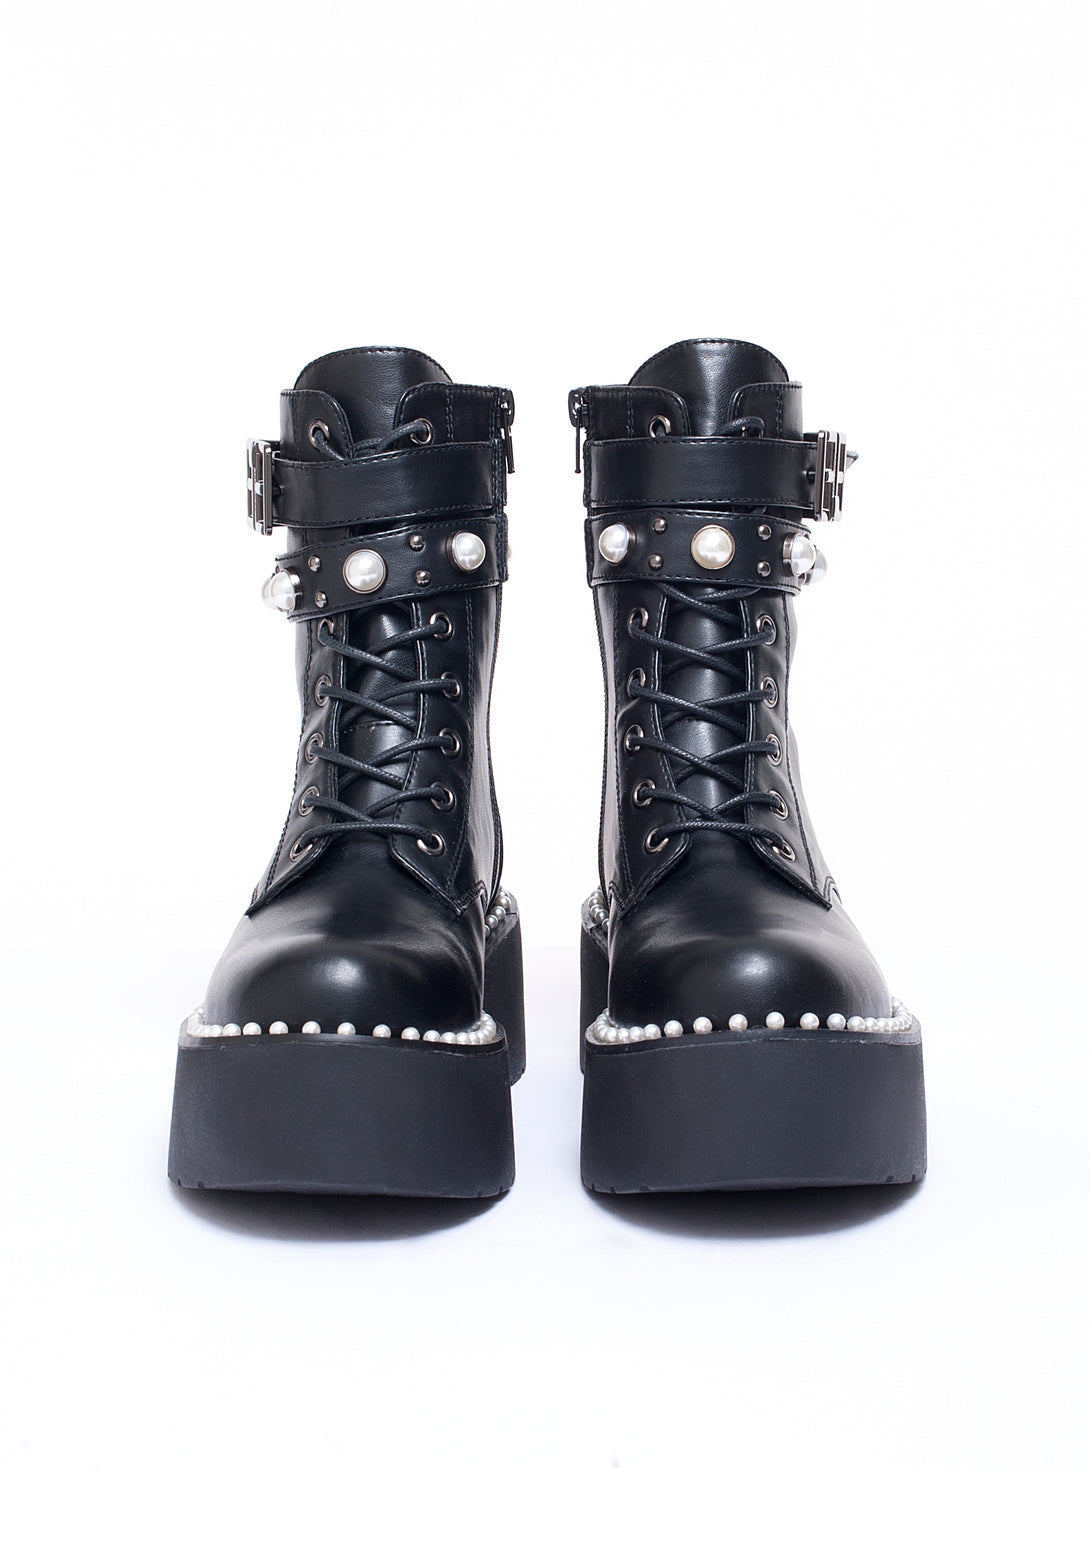 Combat boots made in eco leather with pearls